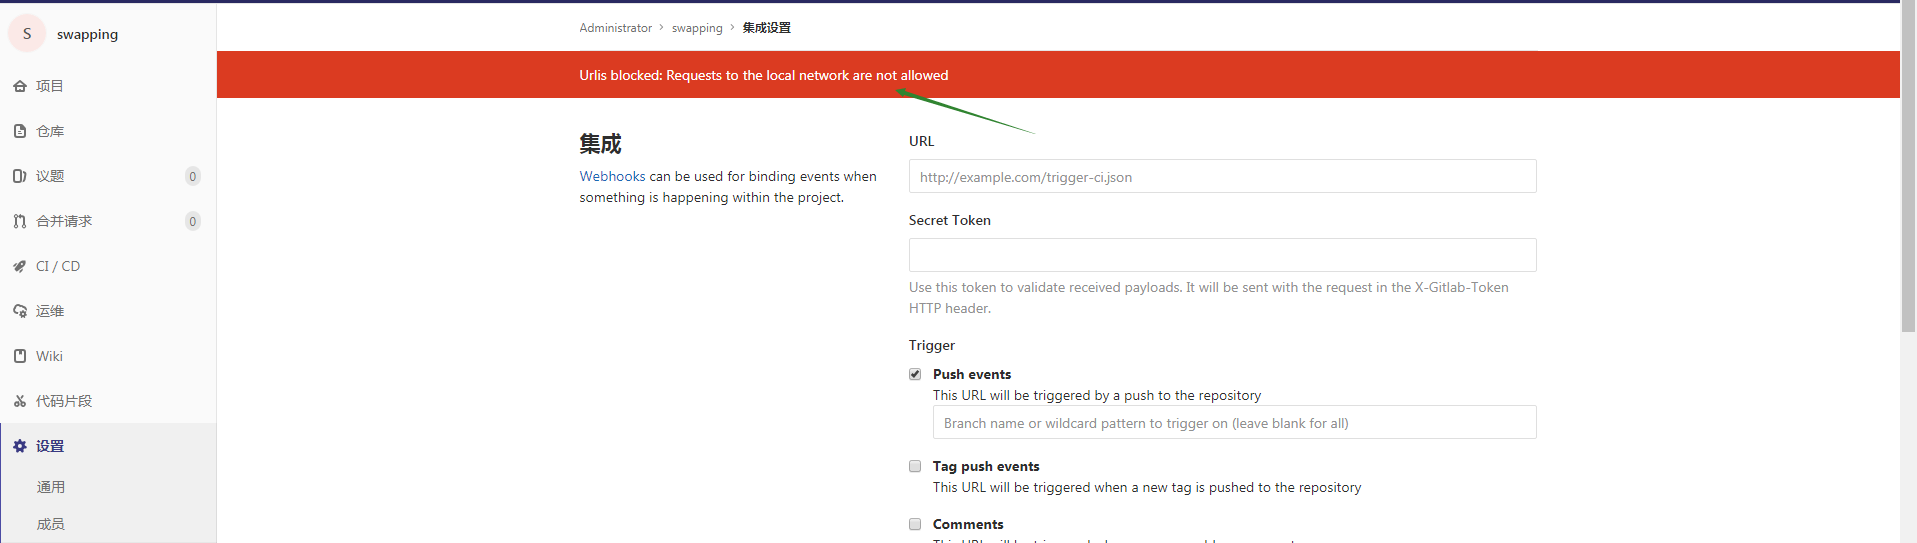 【GitLab】gitlab上配置webhook后，点击测试报错：Requests to the local network are not allowed第2张